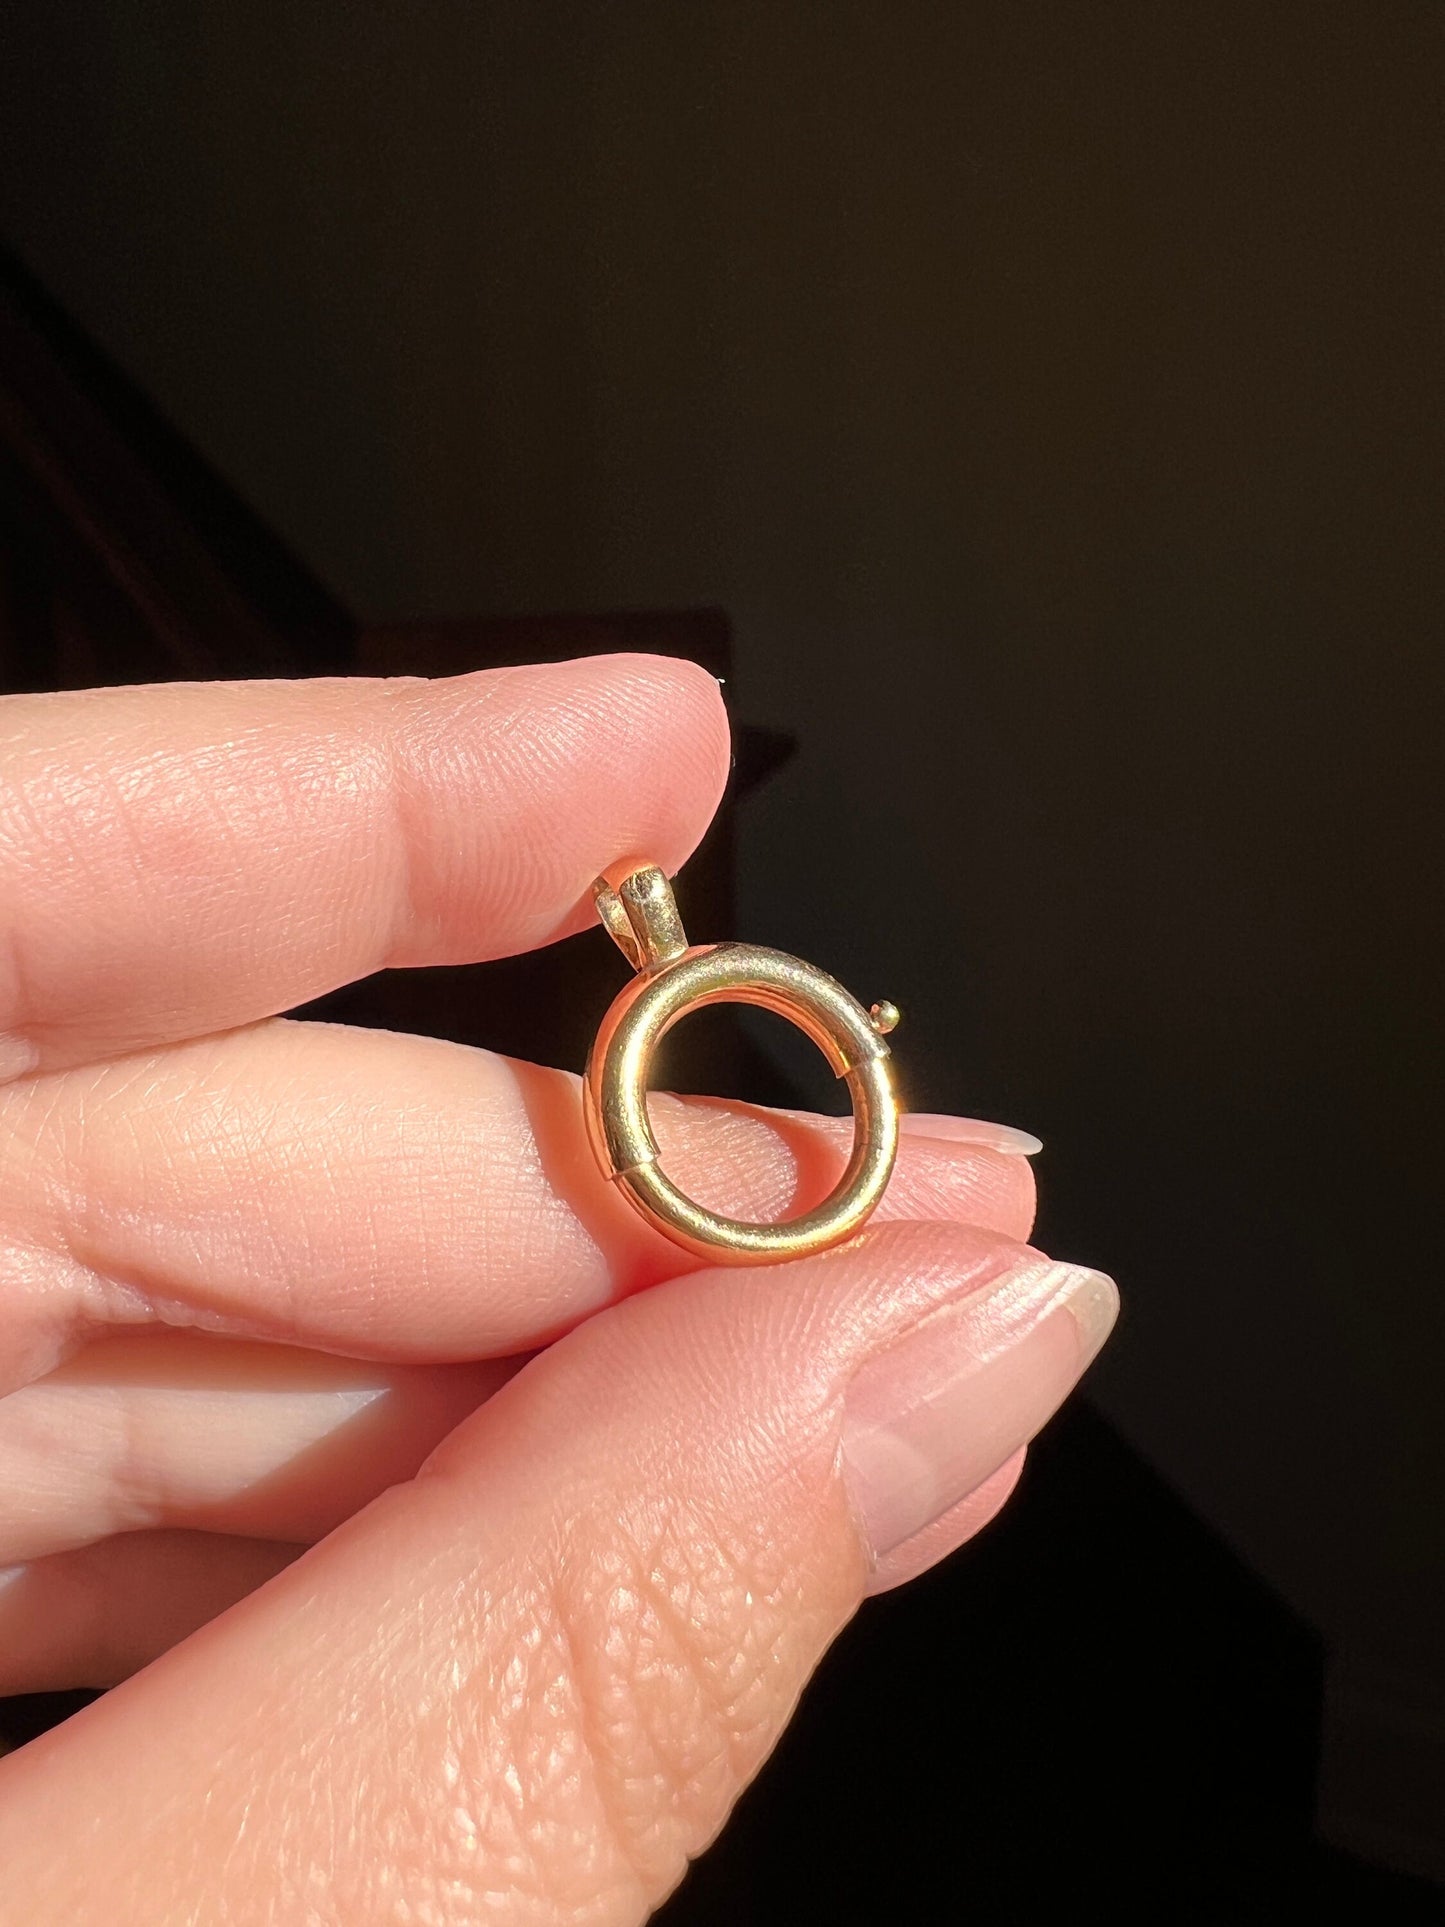 Large Spring Ring FRENCH ANTIQUE 1.9g 18k Gold Rosy Solid 15mm Clip Clasp Pendant Holder Connector Neckmess Neckstack Sturdy Parts Findings